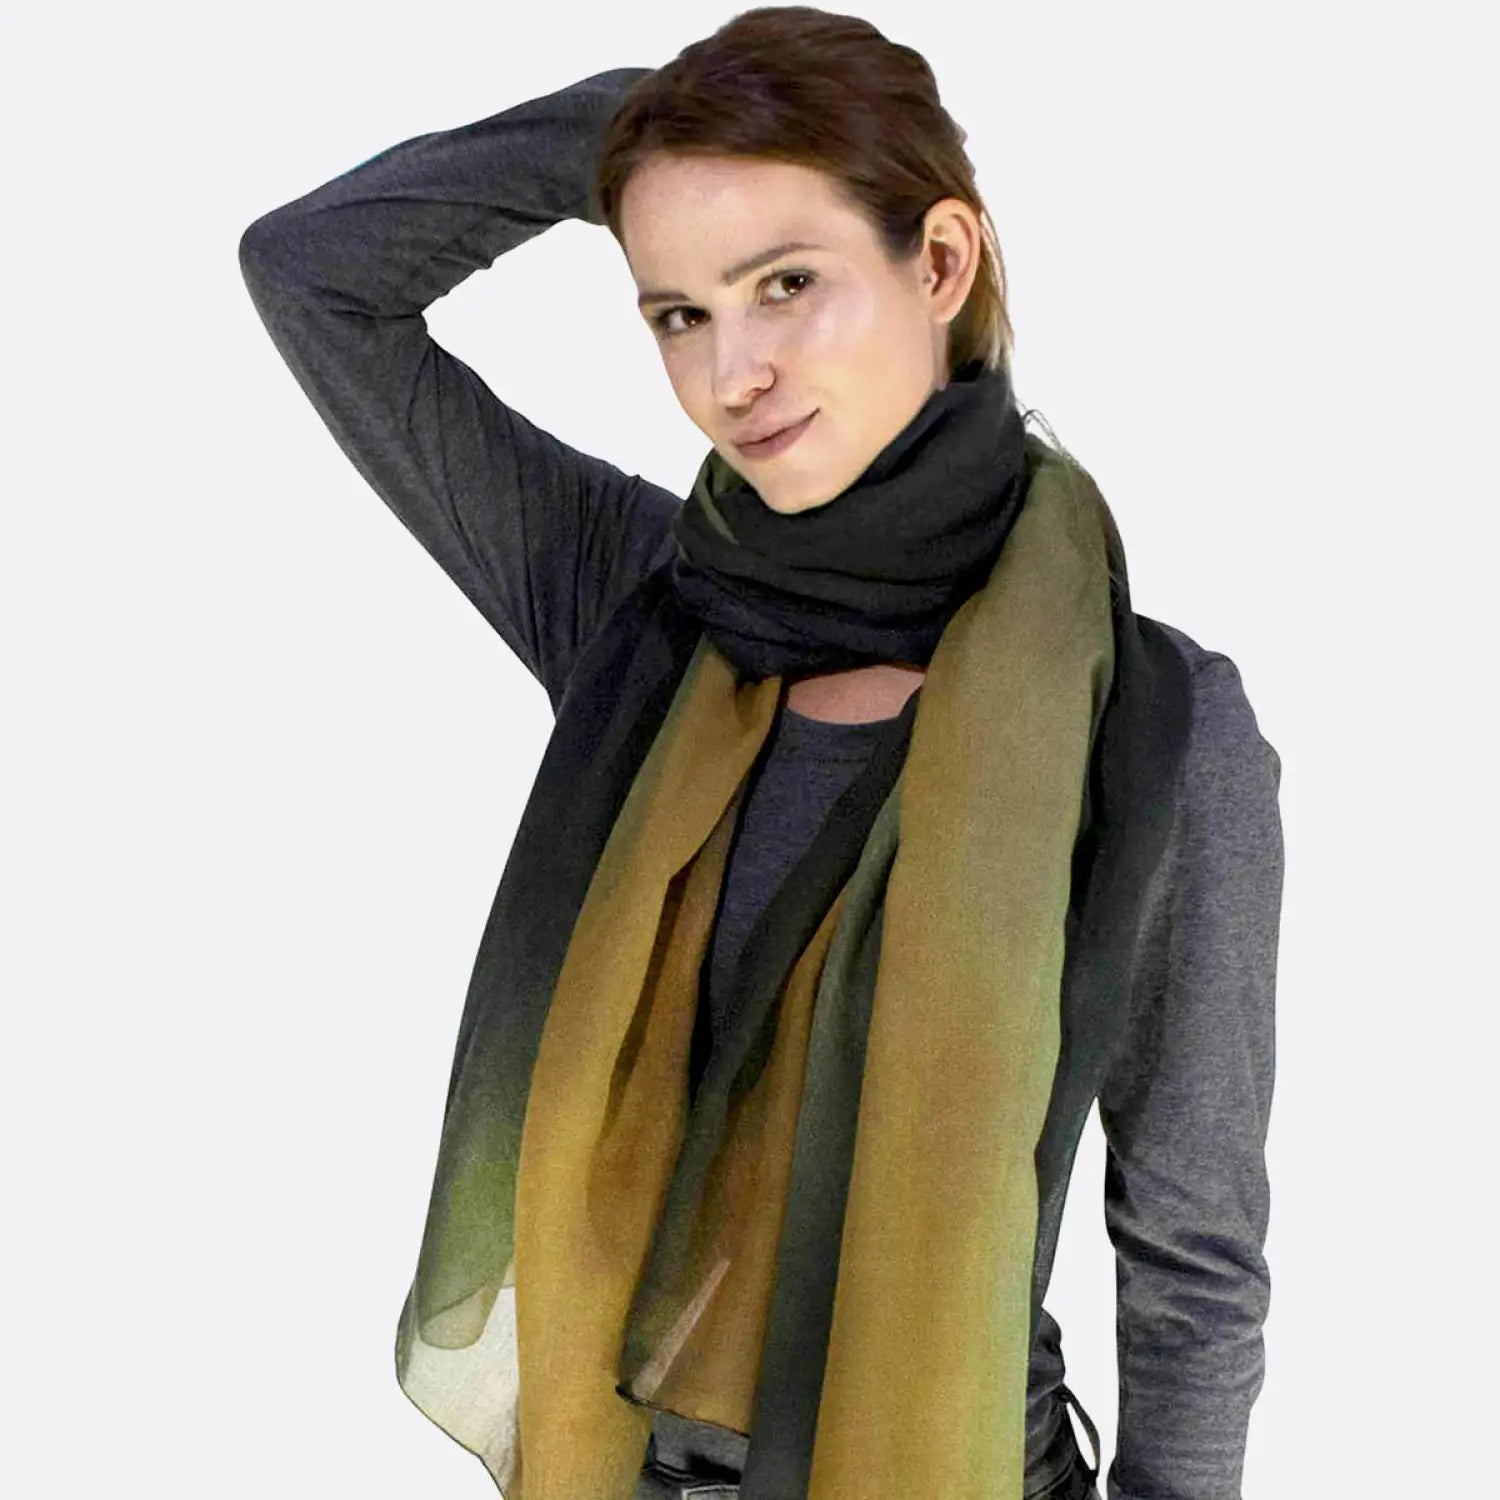 Green and yellow ombre tie dye scarf shawl on woman